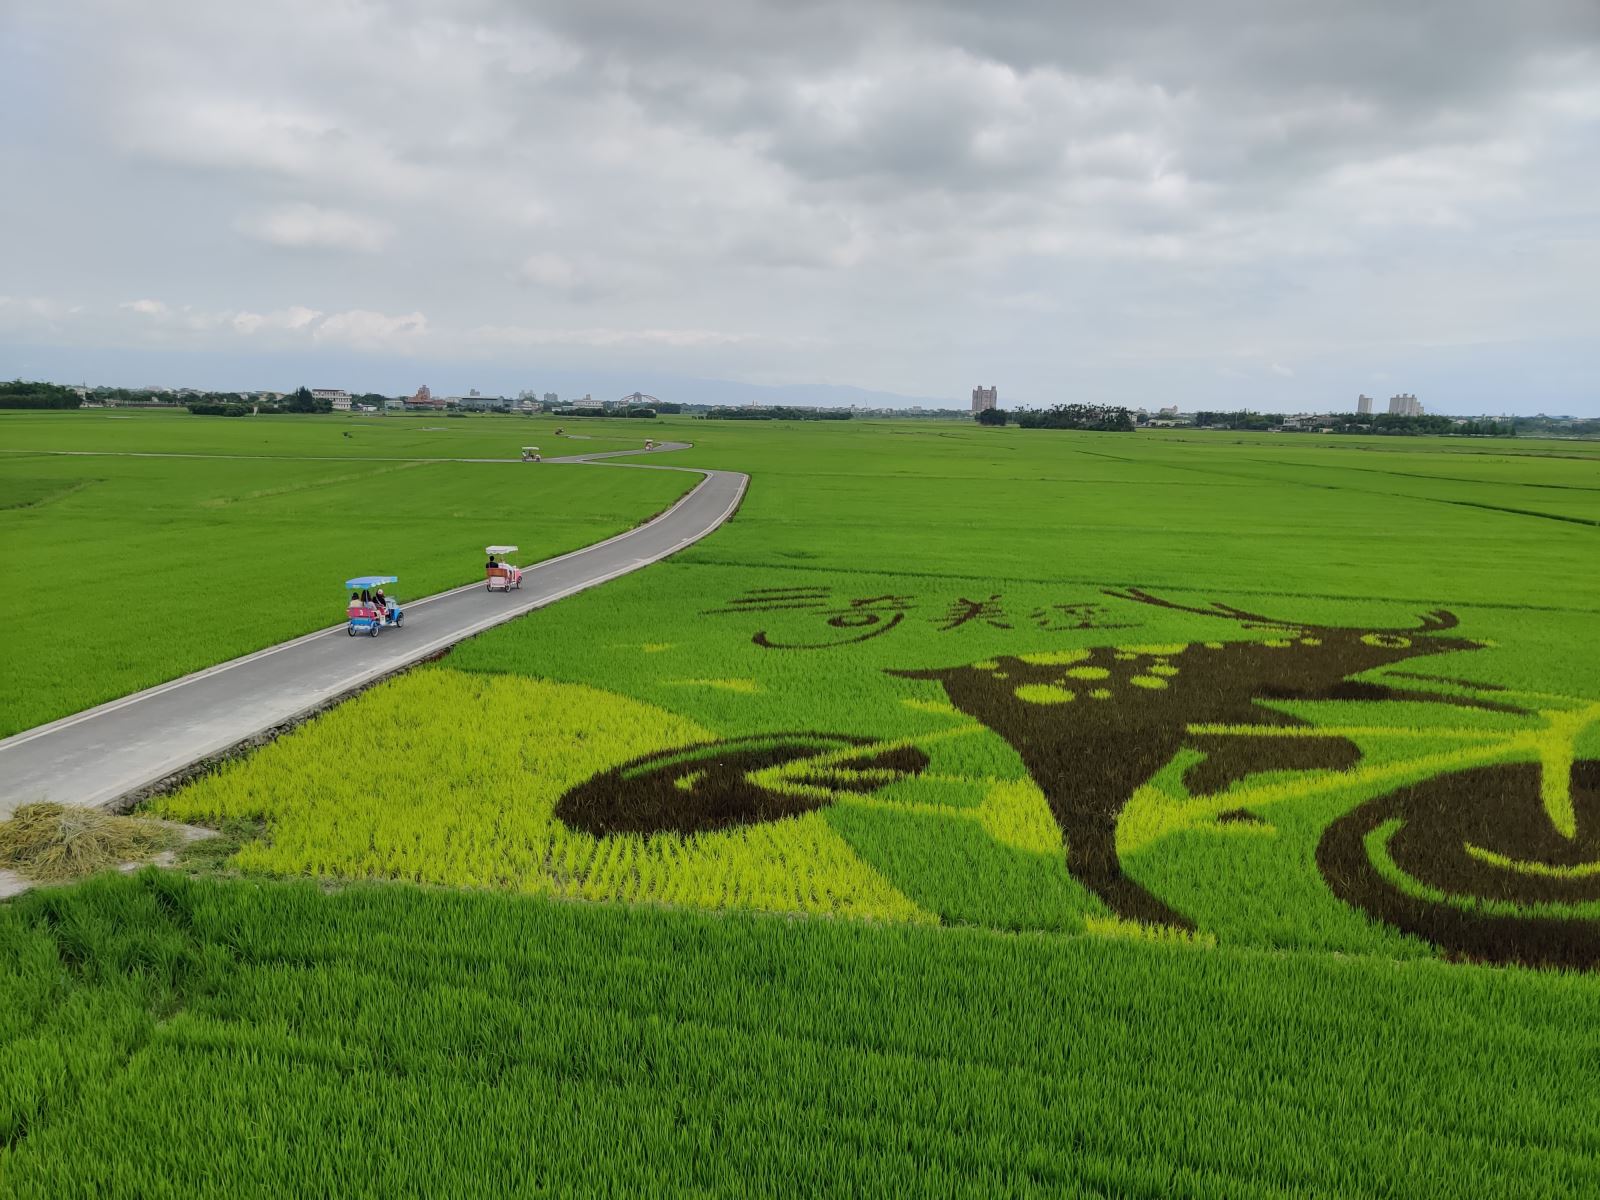 Take a leisurely ride on the iron horse and enjoy the beautiful scenery of the rice waves at the "Sanqi Rice Path" on Yilan Burang Avenue.